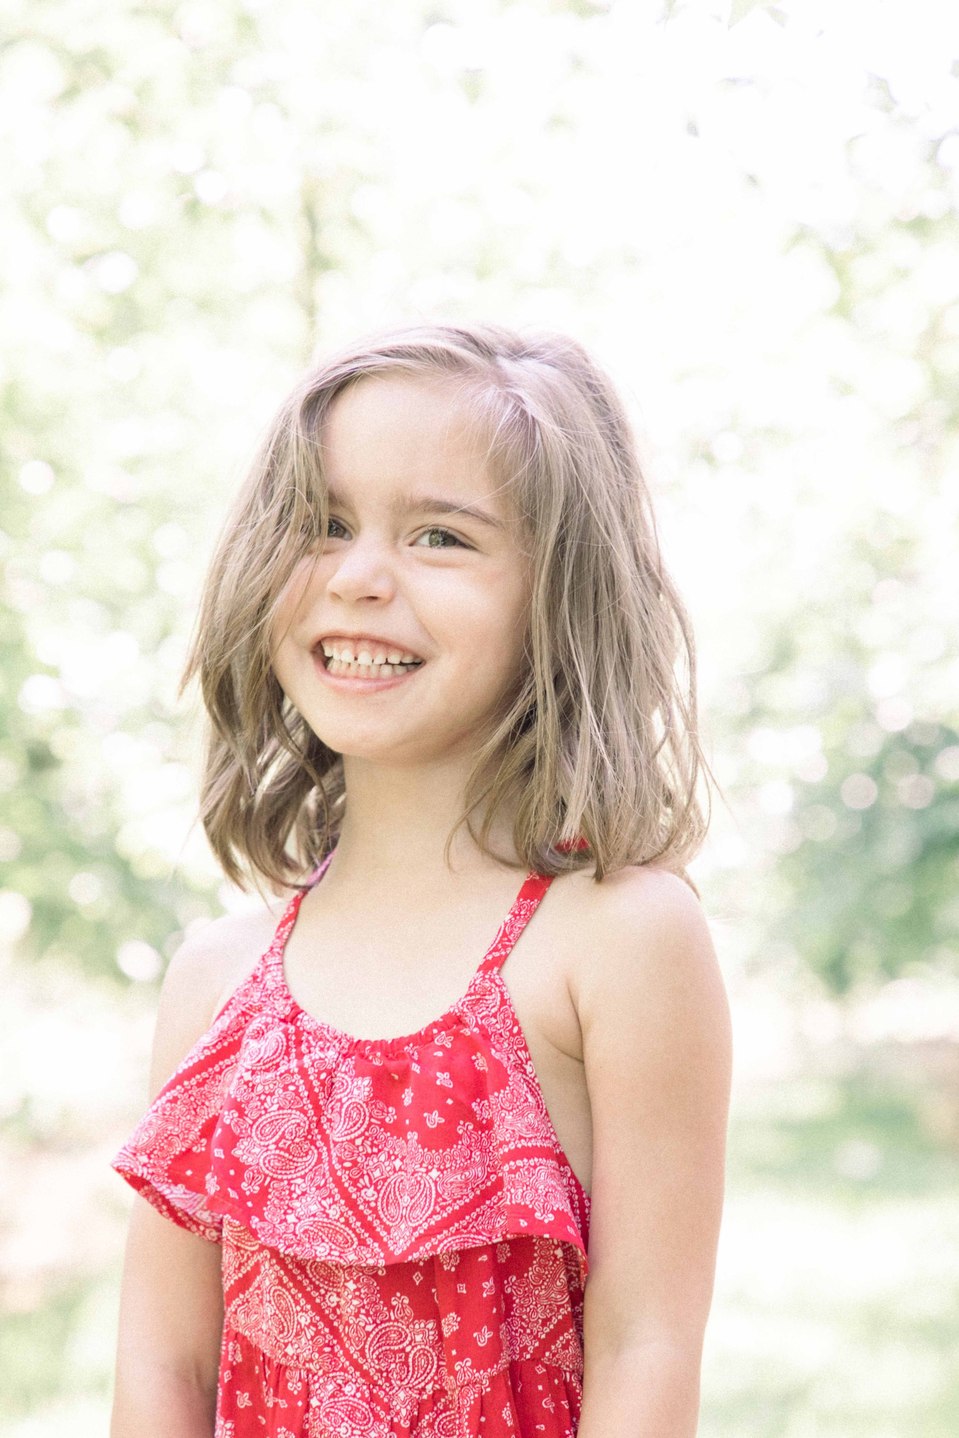 Portrait of young girl laughing while standing in fruit orchard, Niagara family photographer, Niagara portrait photographer, family photography, portrait photography, candid photography, authentic photography, Emily VanderBeek Photography.